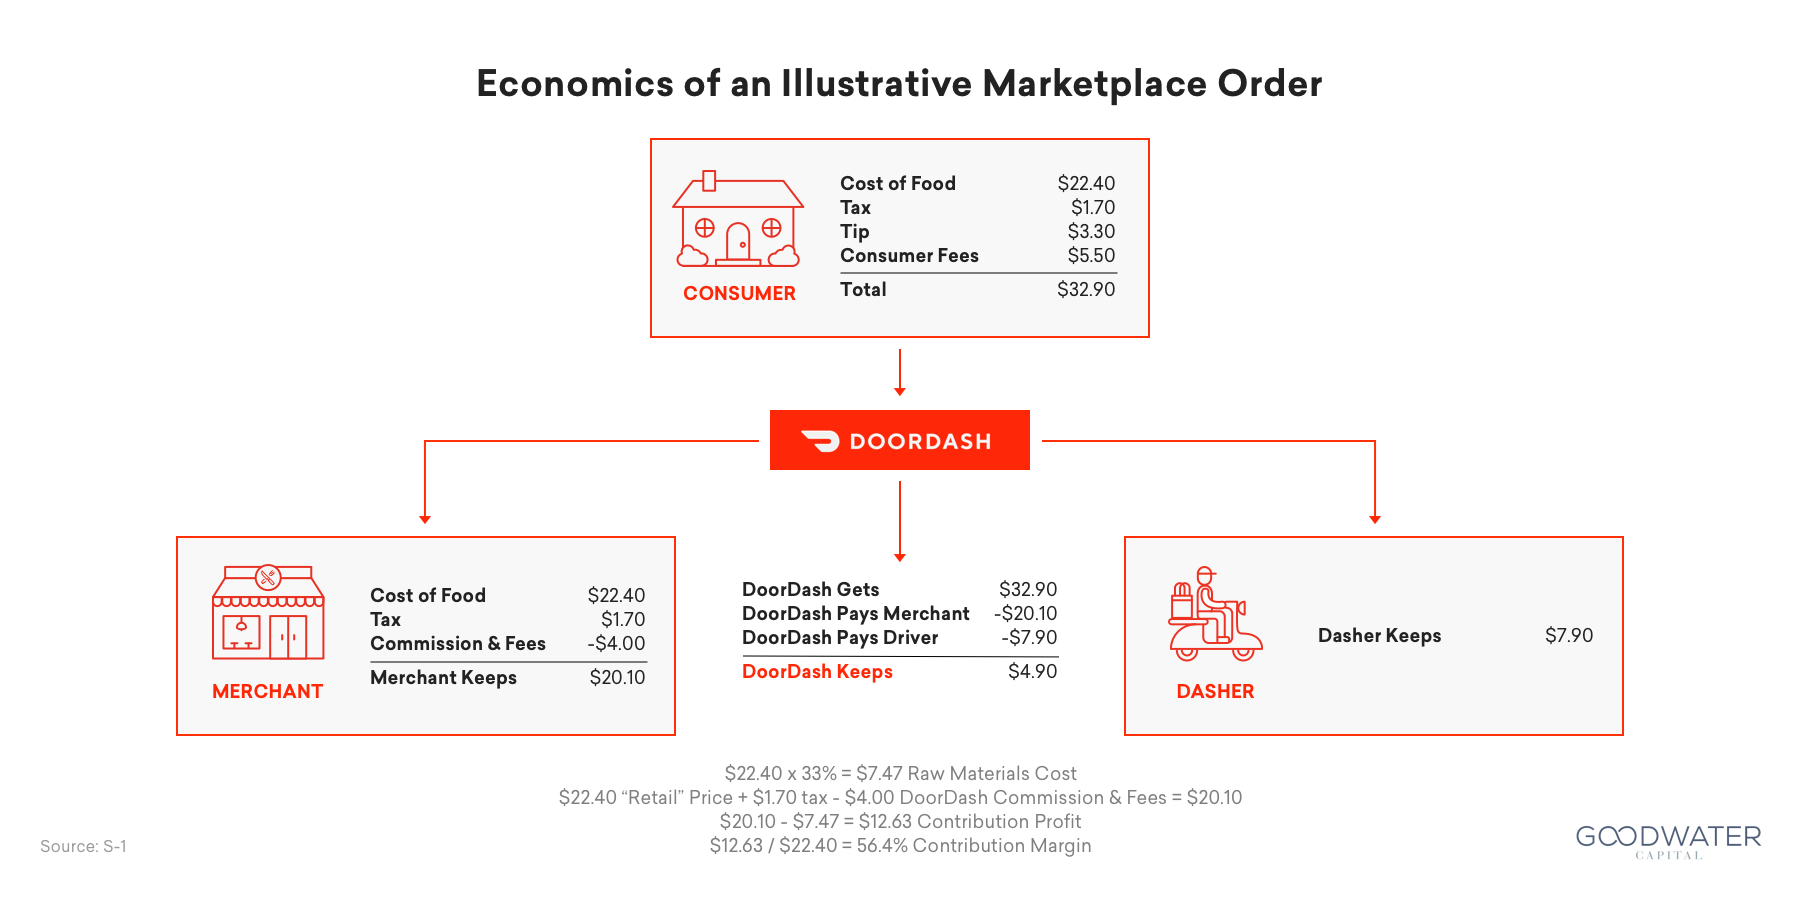 DoorDash projects core profit above estimates as delivery orders